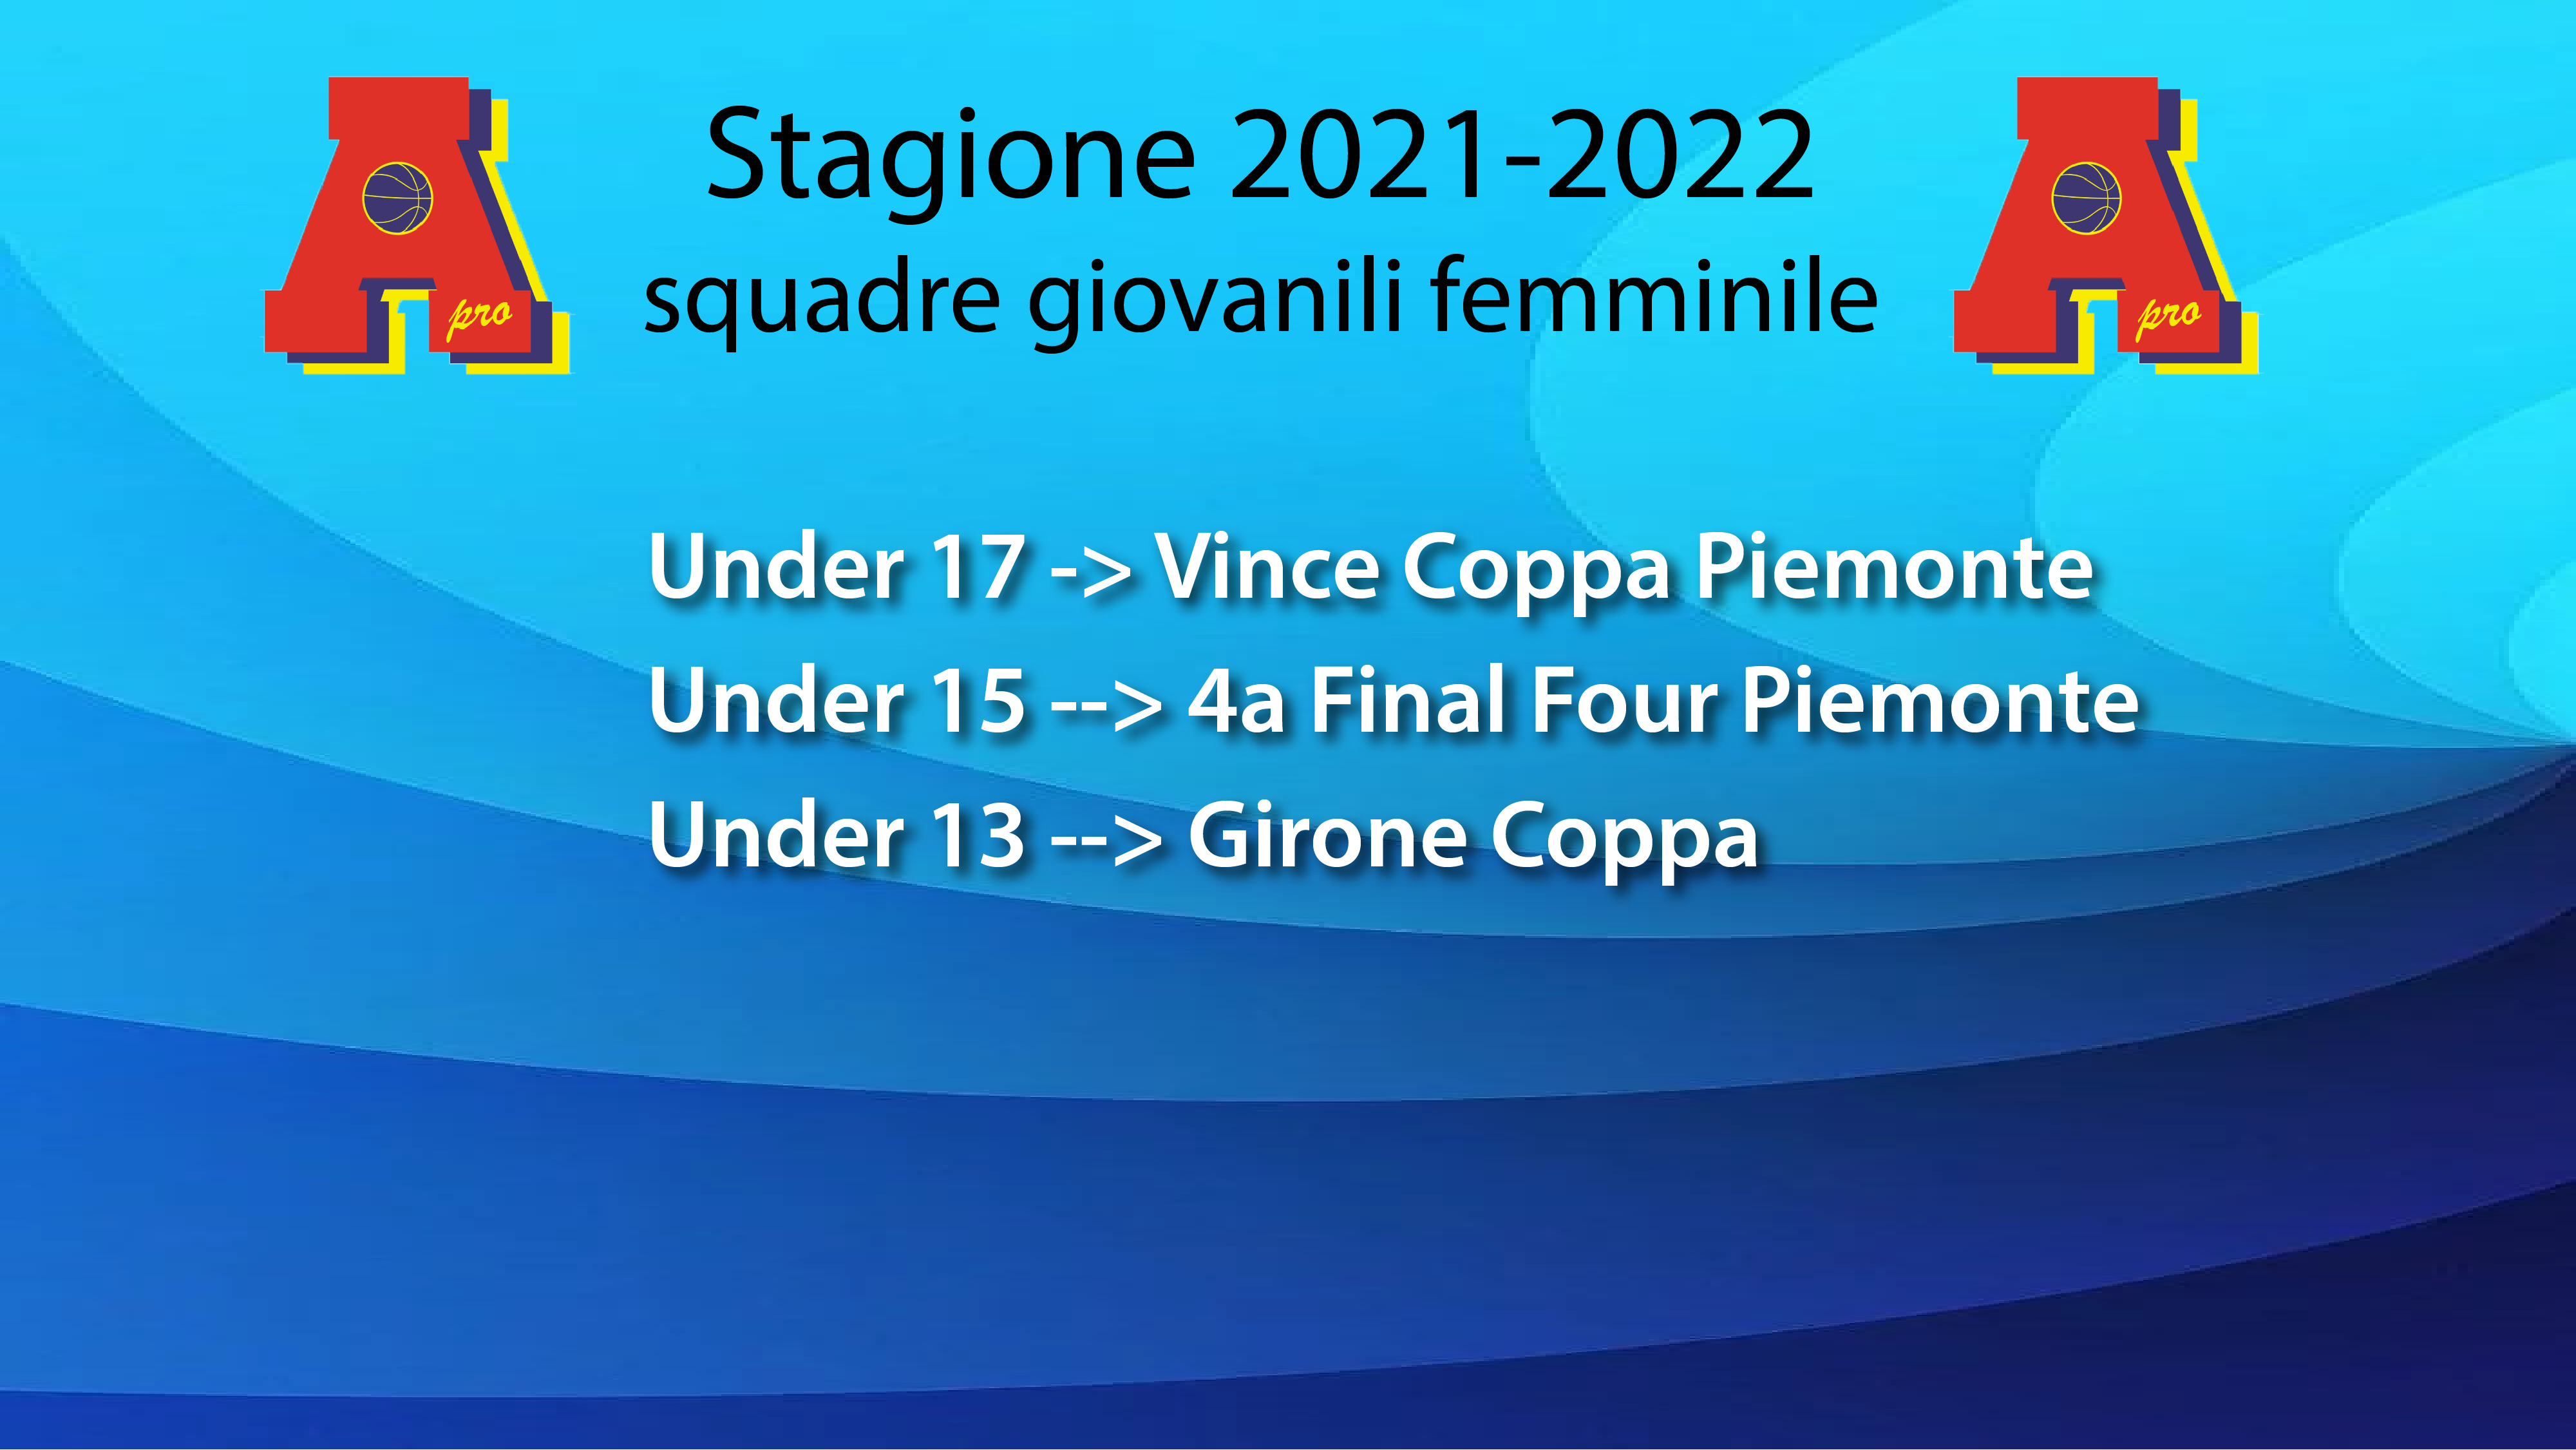 Stagione 2021-2022